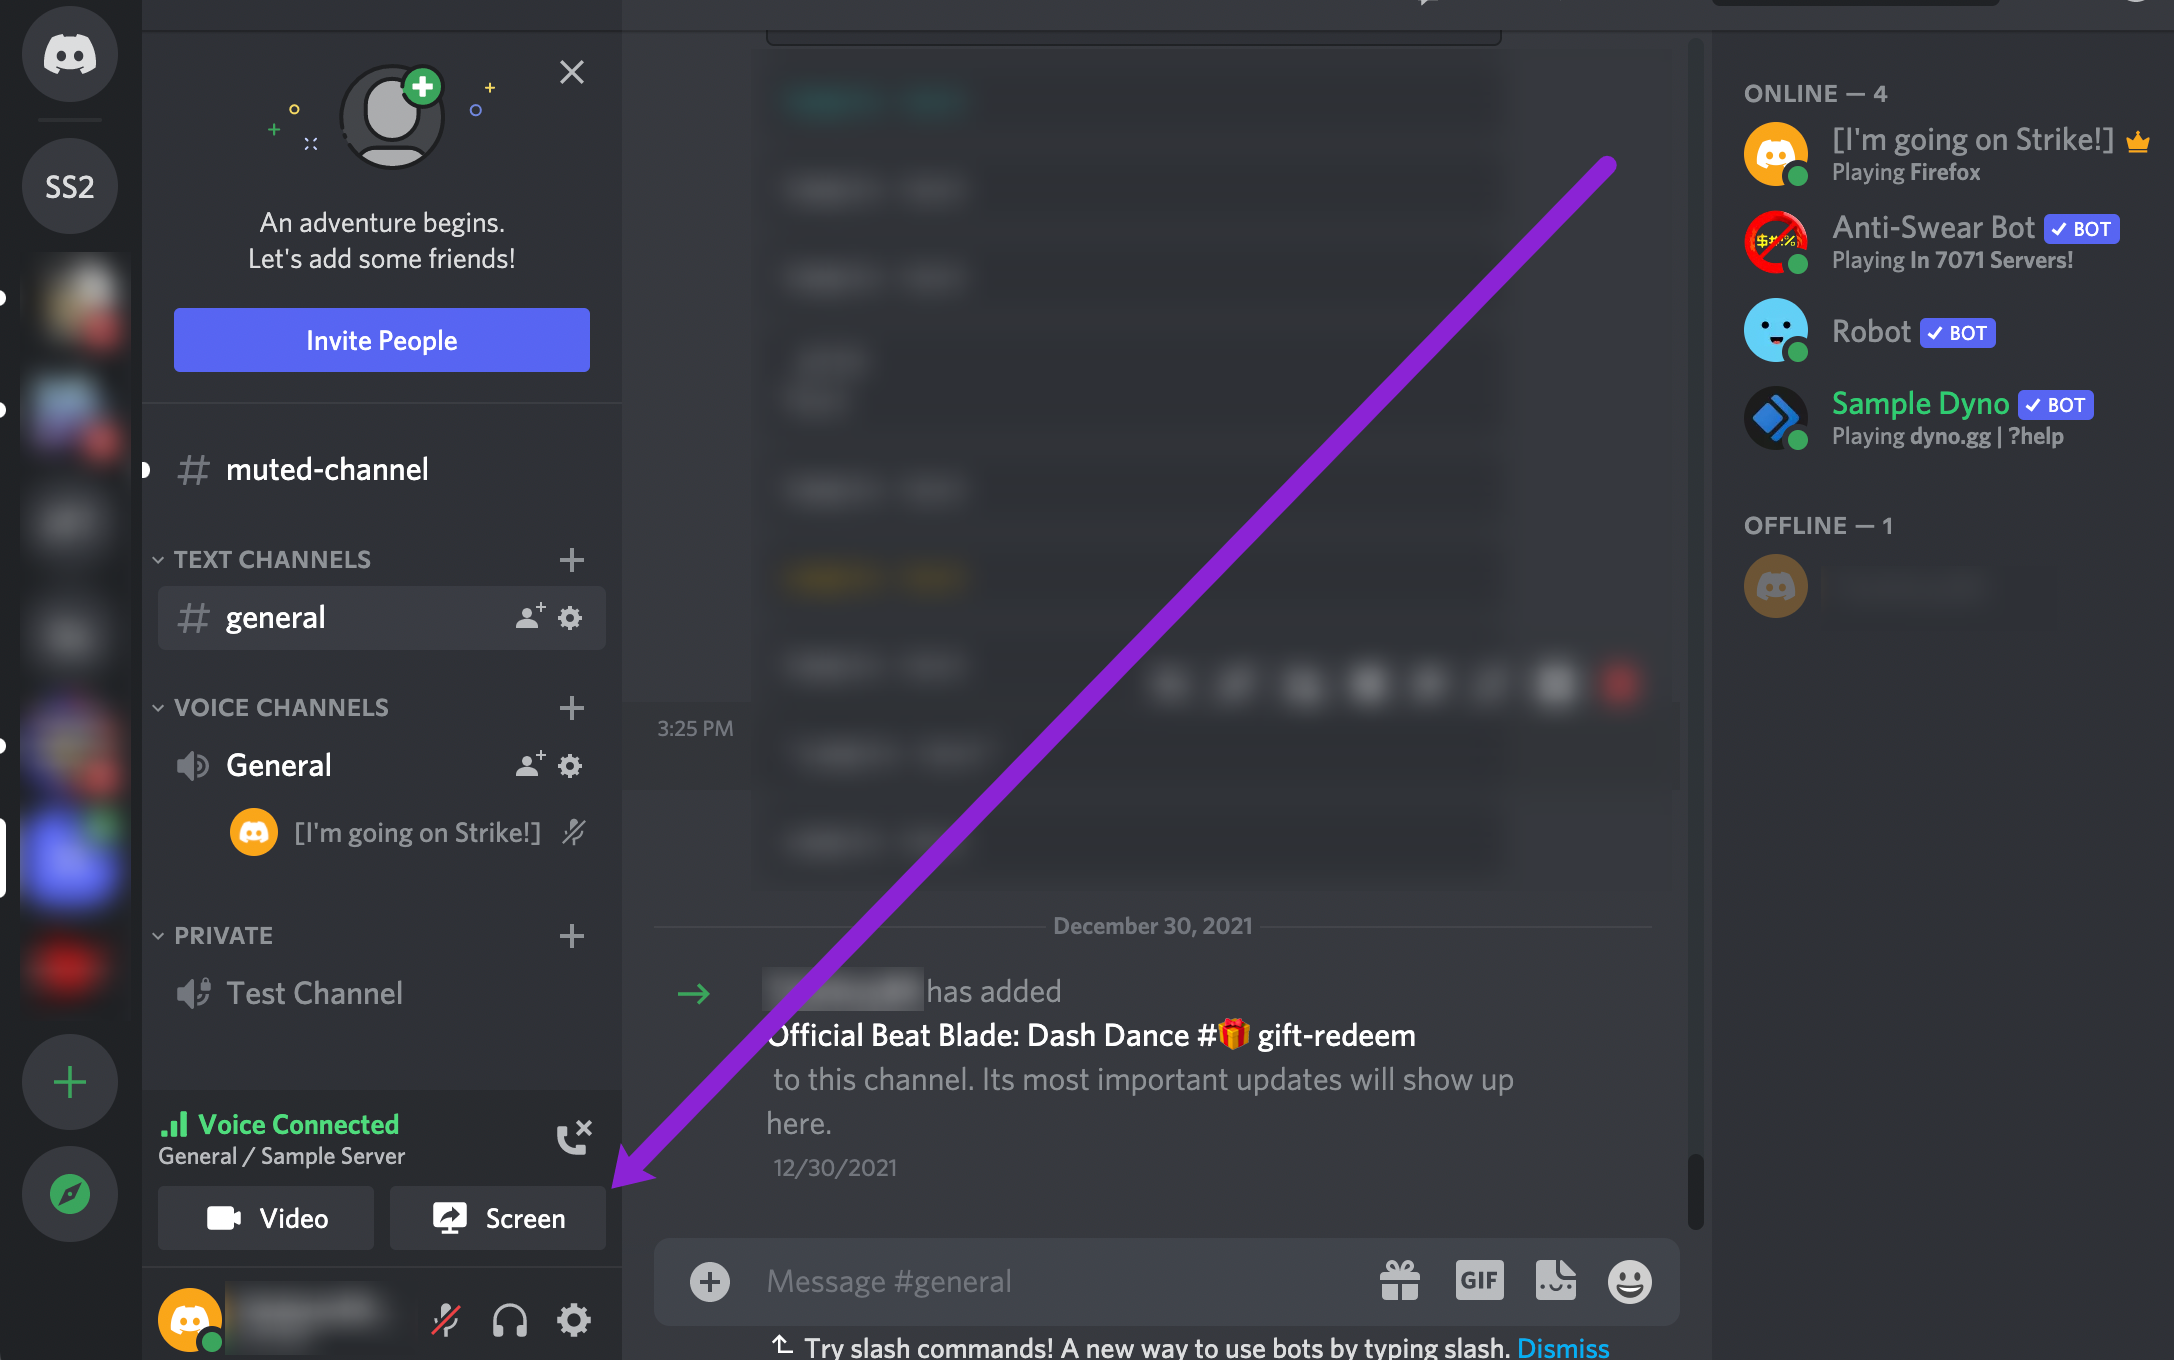 5 Games to Play on Discord and Zoom for Your Next Virtual Hangout